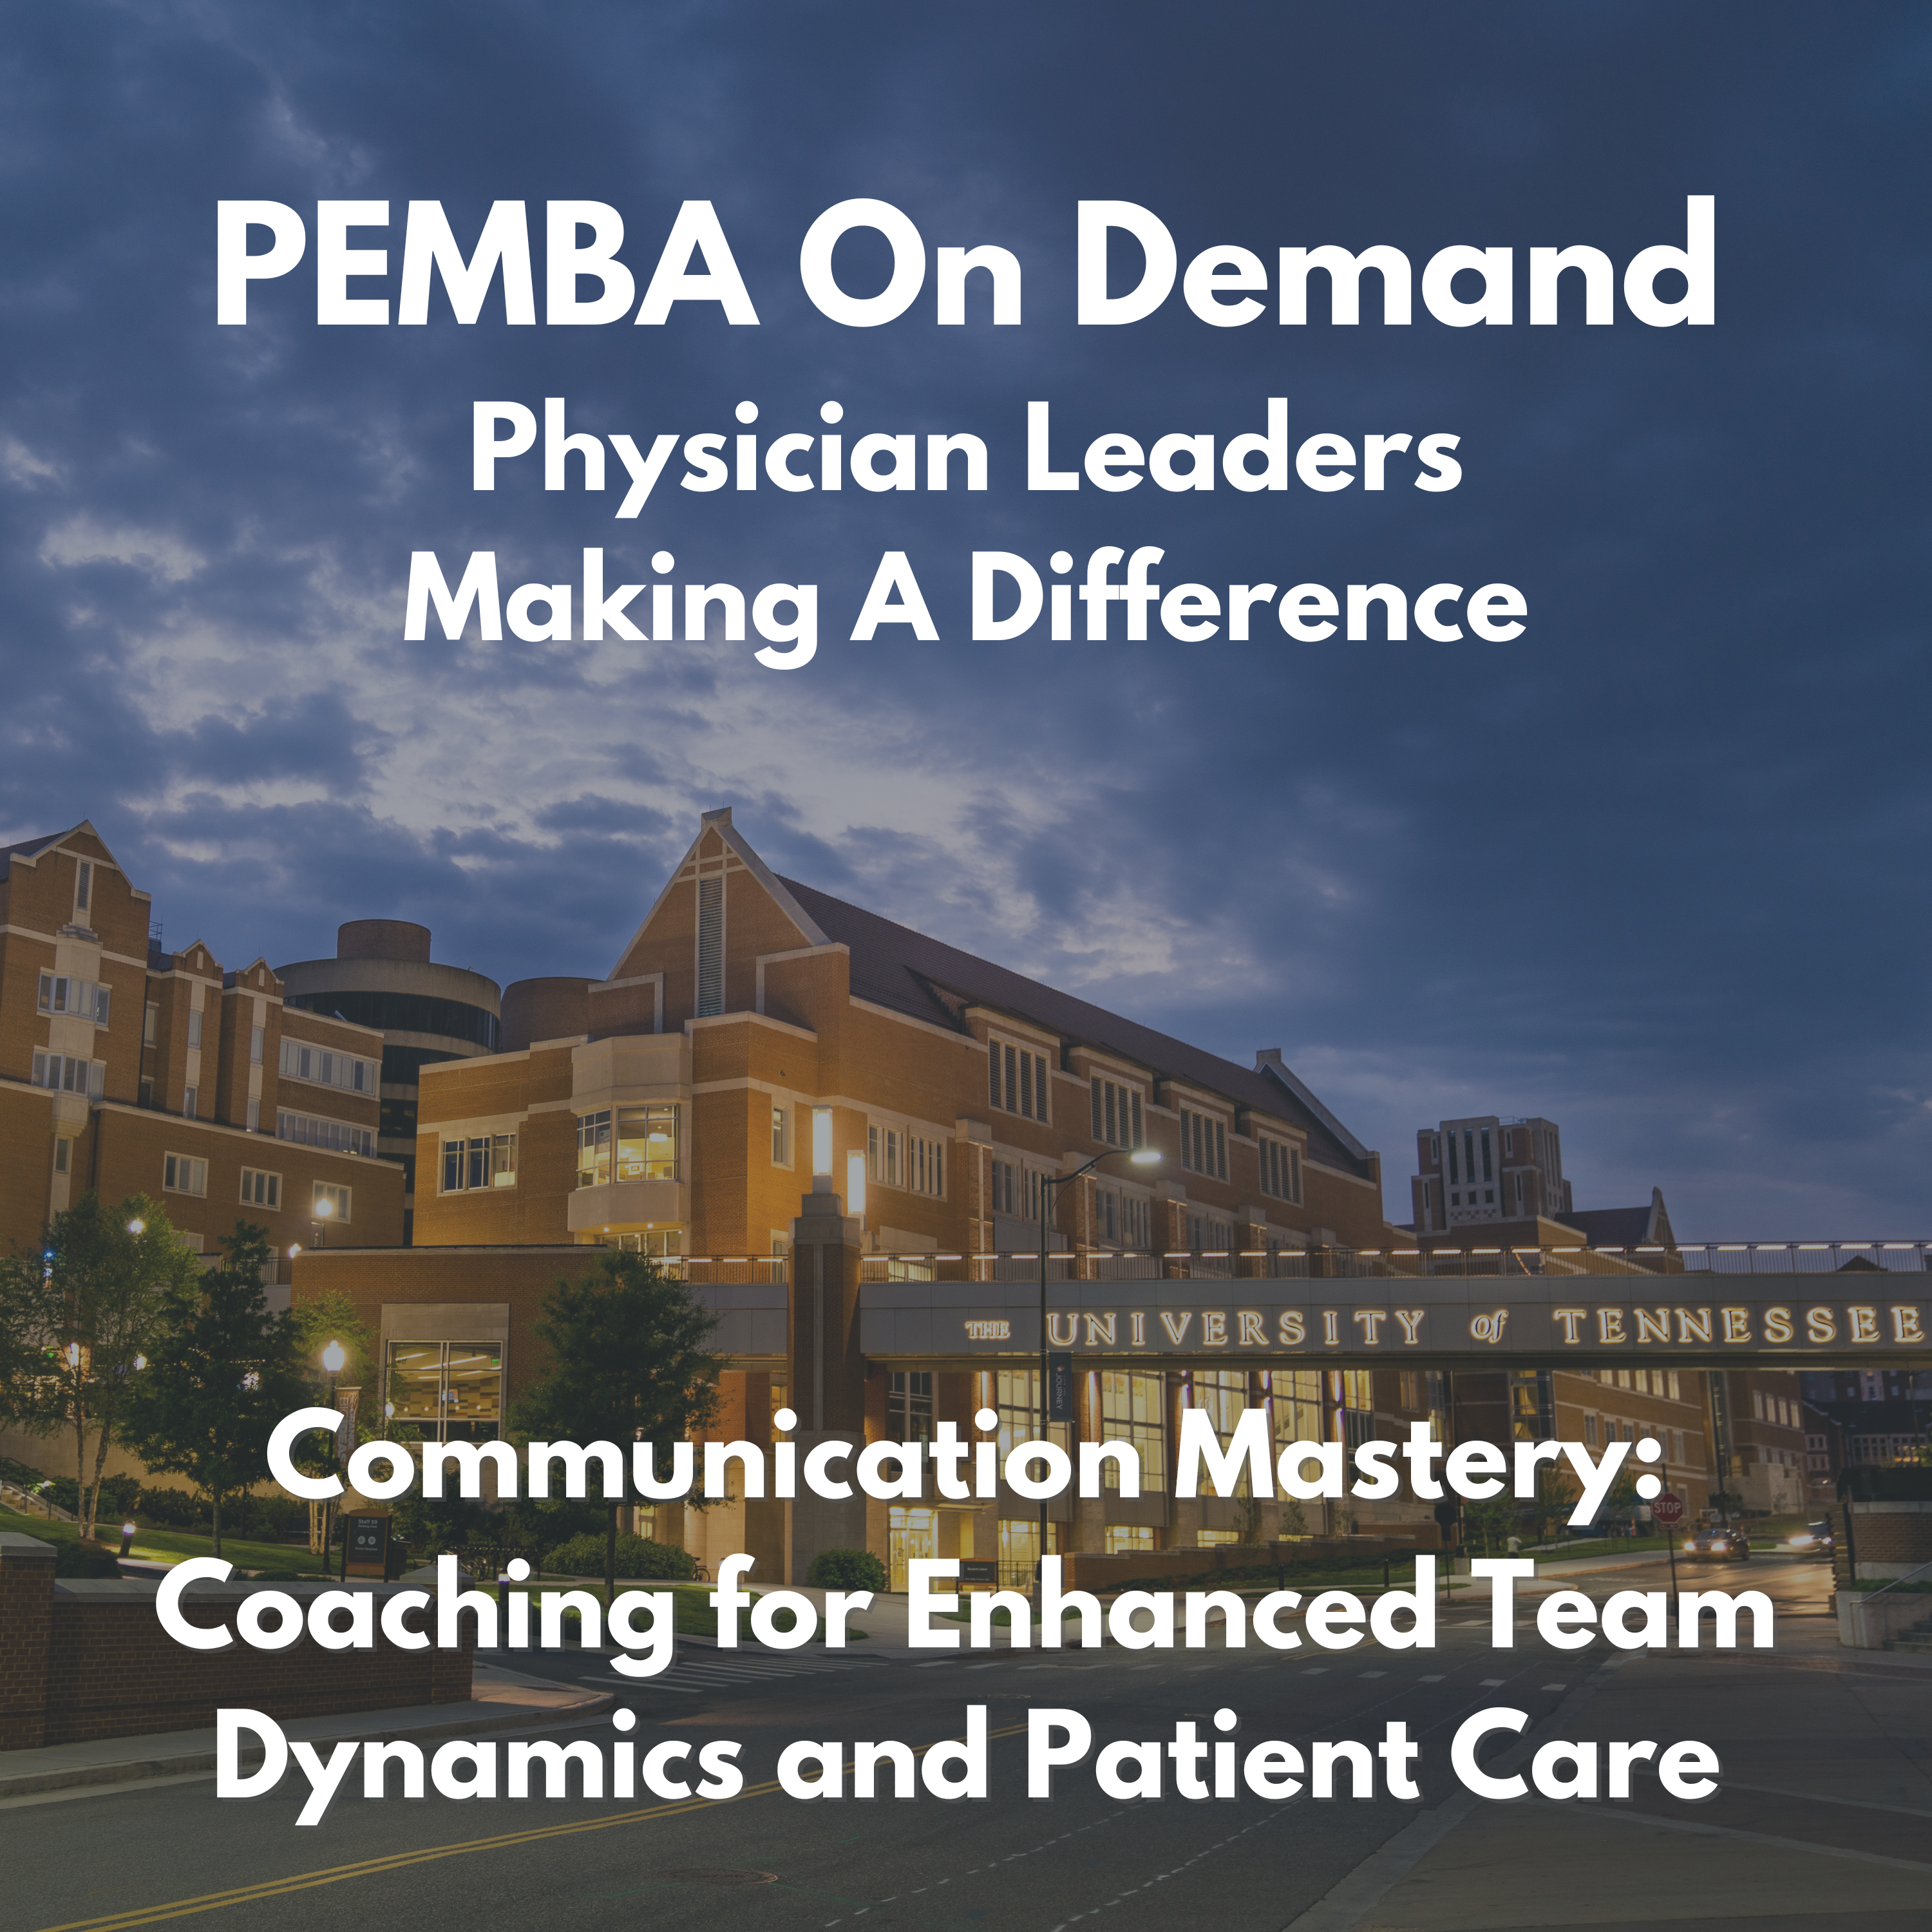 Communications Mastery: Coaching for Enhanced Team Dynamics and Patient Care